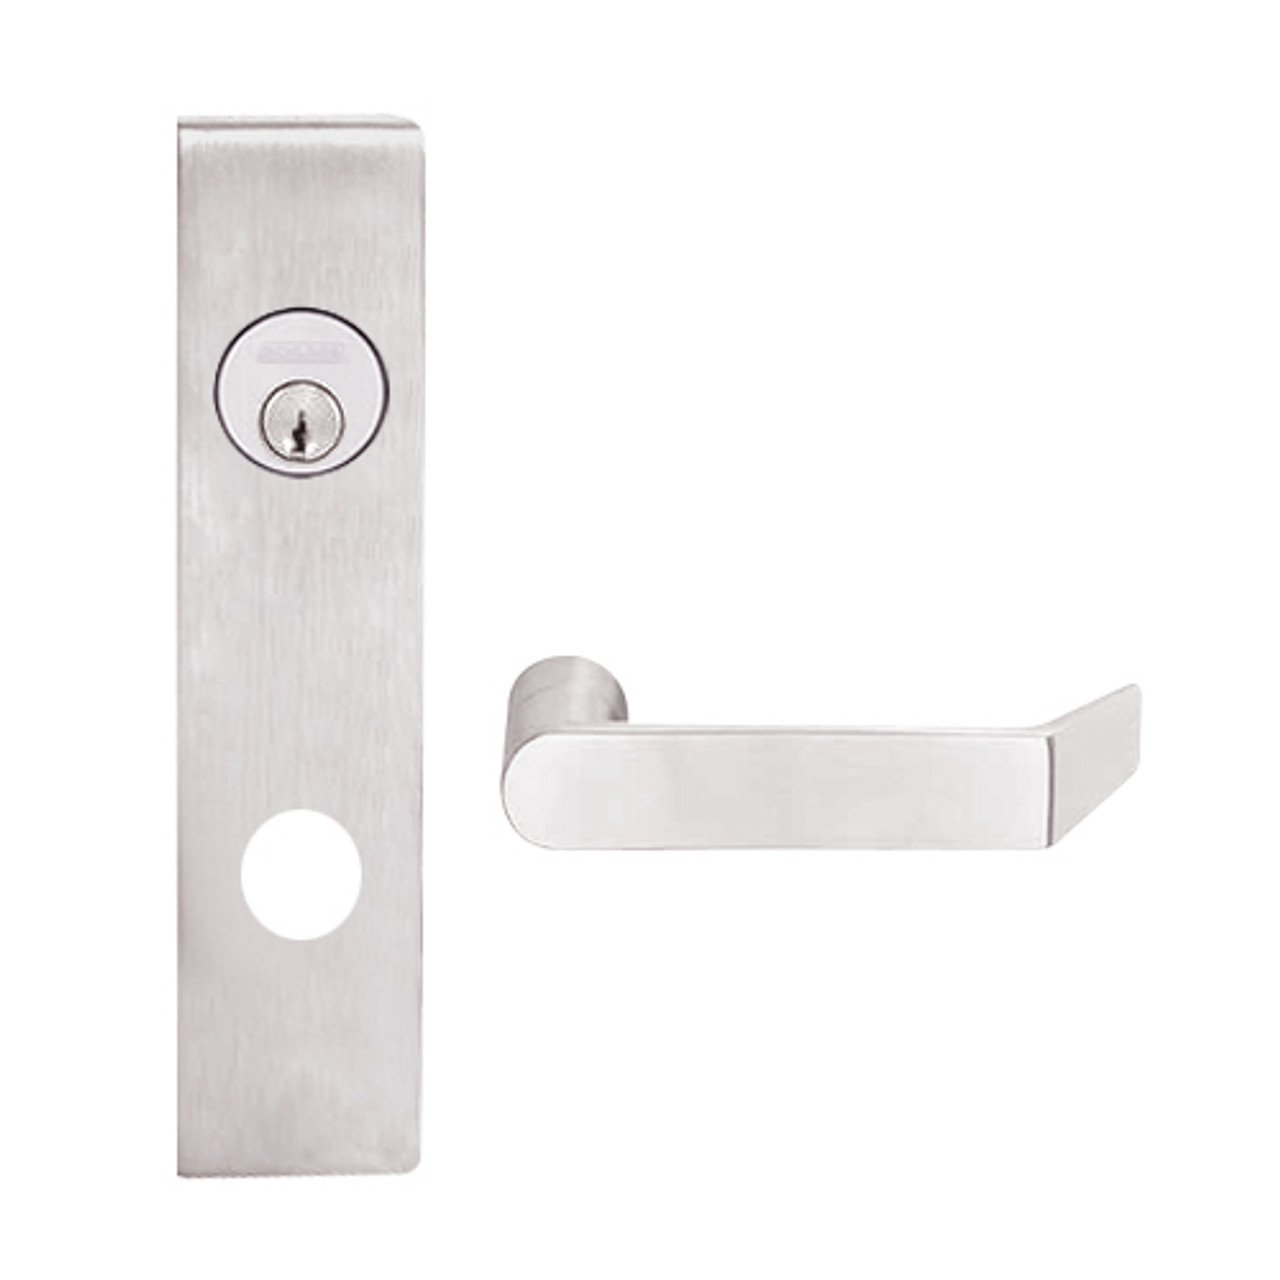 L9453P-06L-629 Schlage L Series Entrance with Deadbolt Commercial Mortise Lock with 06 Cast Lever Design in Bright Stainless Steel